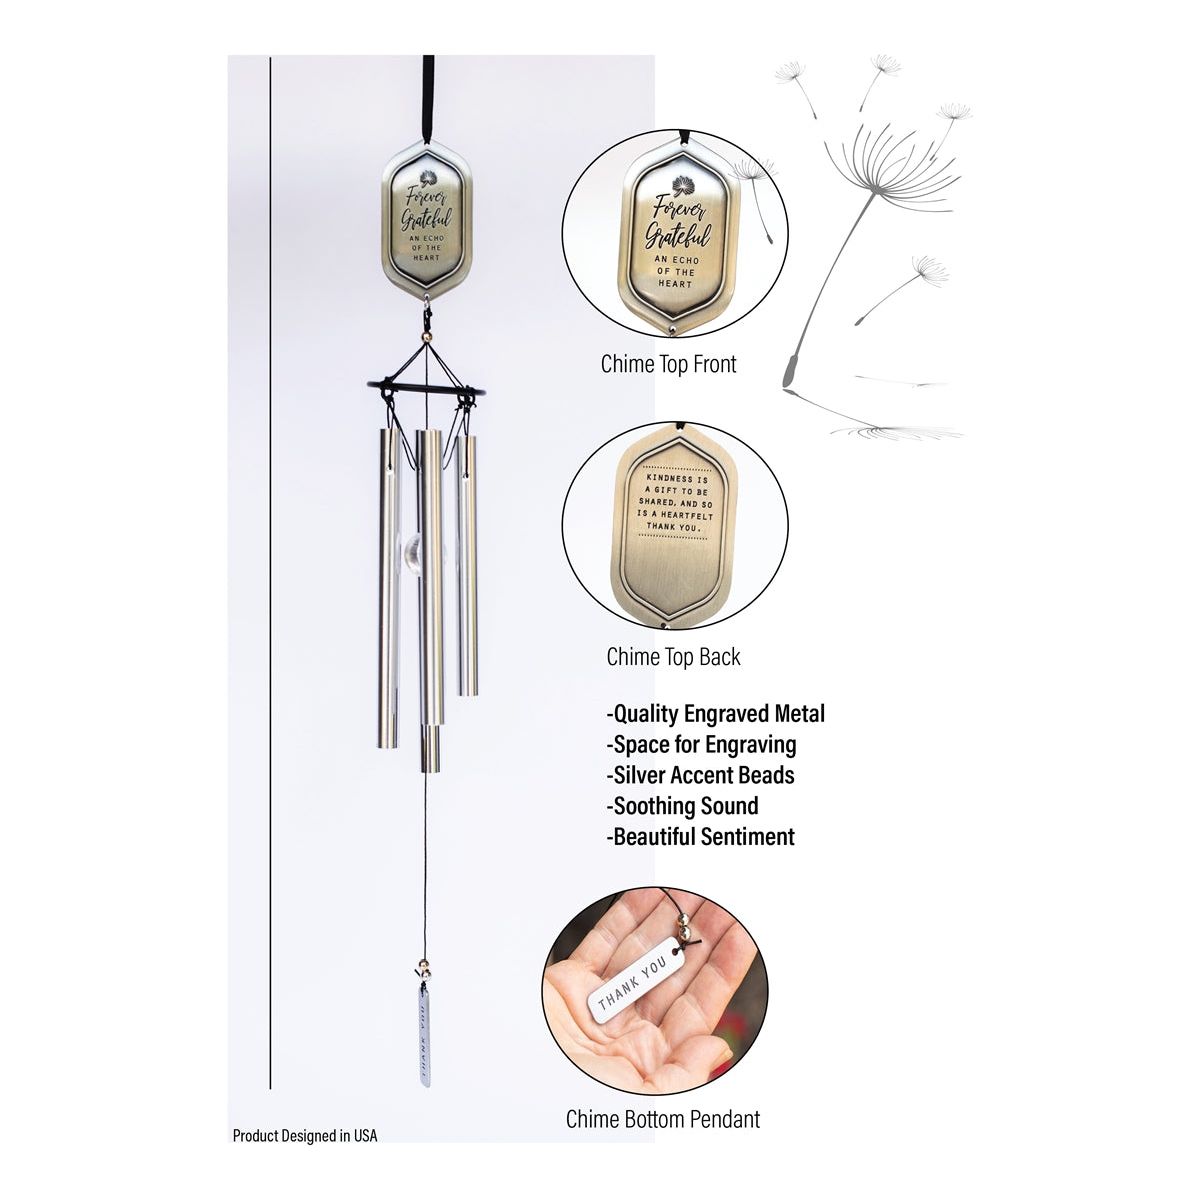 The Forever Grateful Windchime with close up views of the sentiment on front and back of the chime topper.